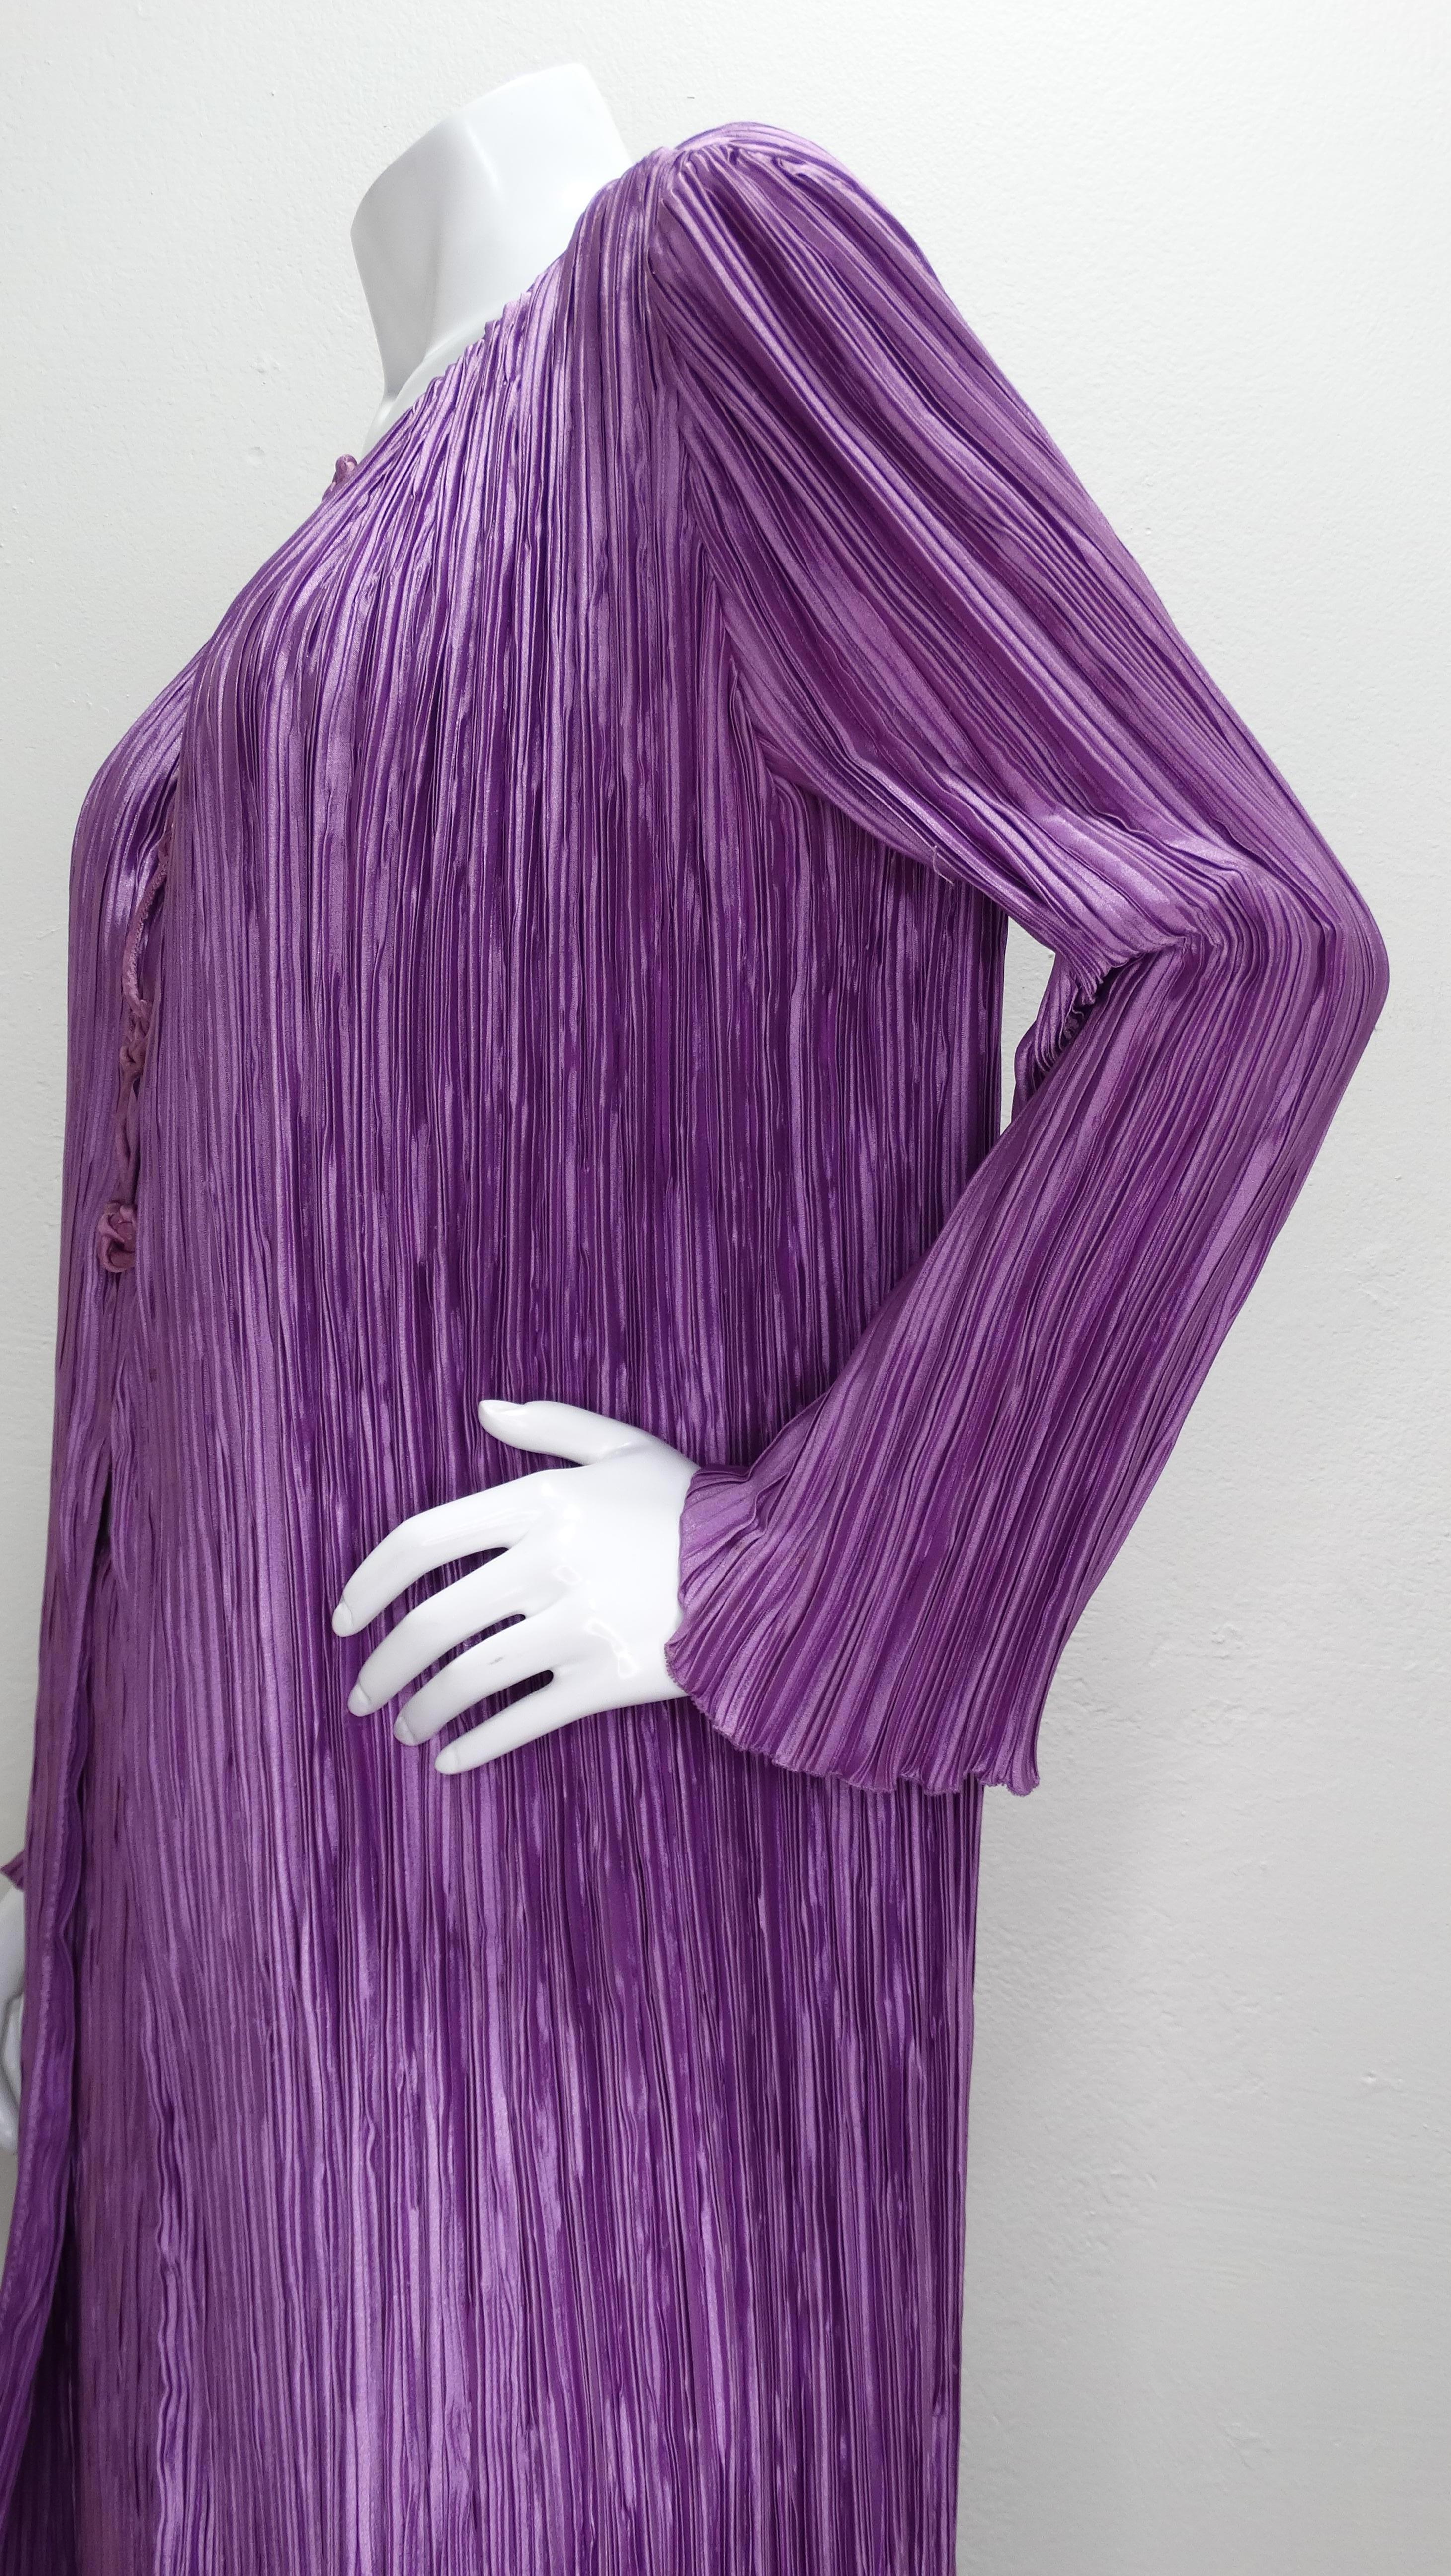 Look breezy and effortless in this beautiful 1980s Mary McFadden two piece outfit! Made of 100% silk fabric in a rich shade of purple, this look features a pleated asymmetrical jacket with knotted hook and eye closure buttons down the front and a